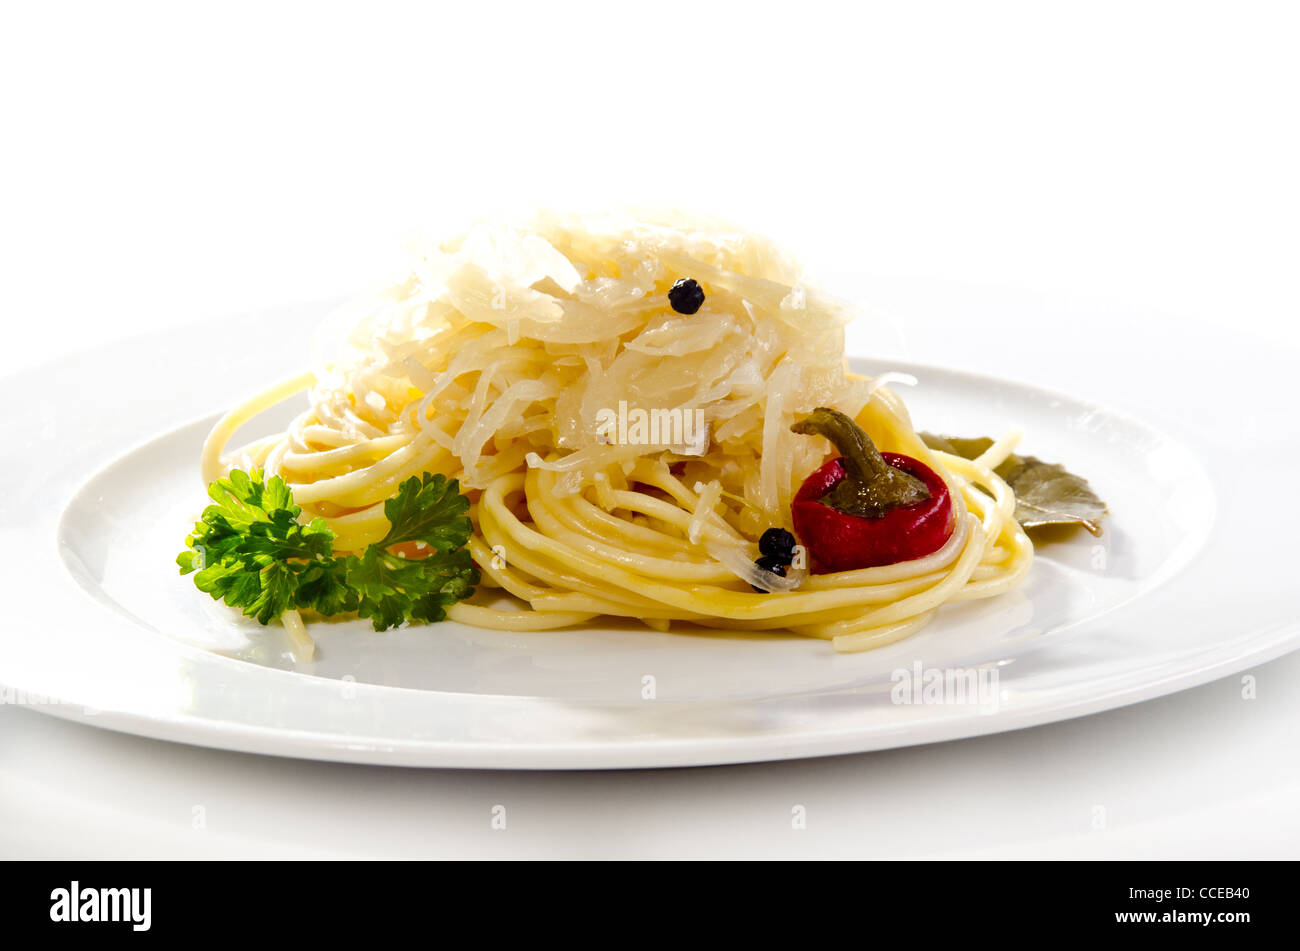 Sauerkraut with spaghetti and red pepper on a white plate Stock Photo